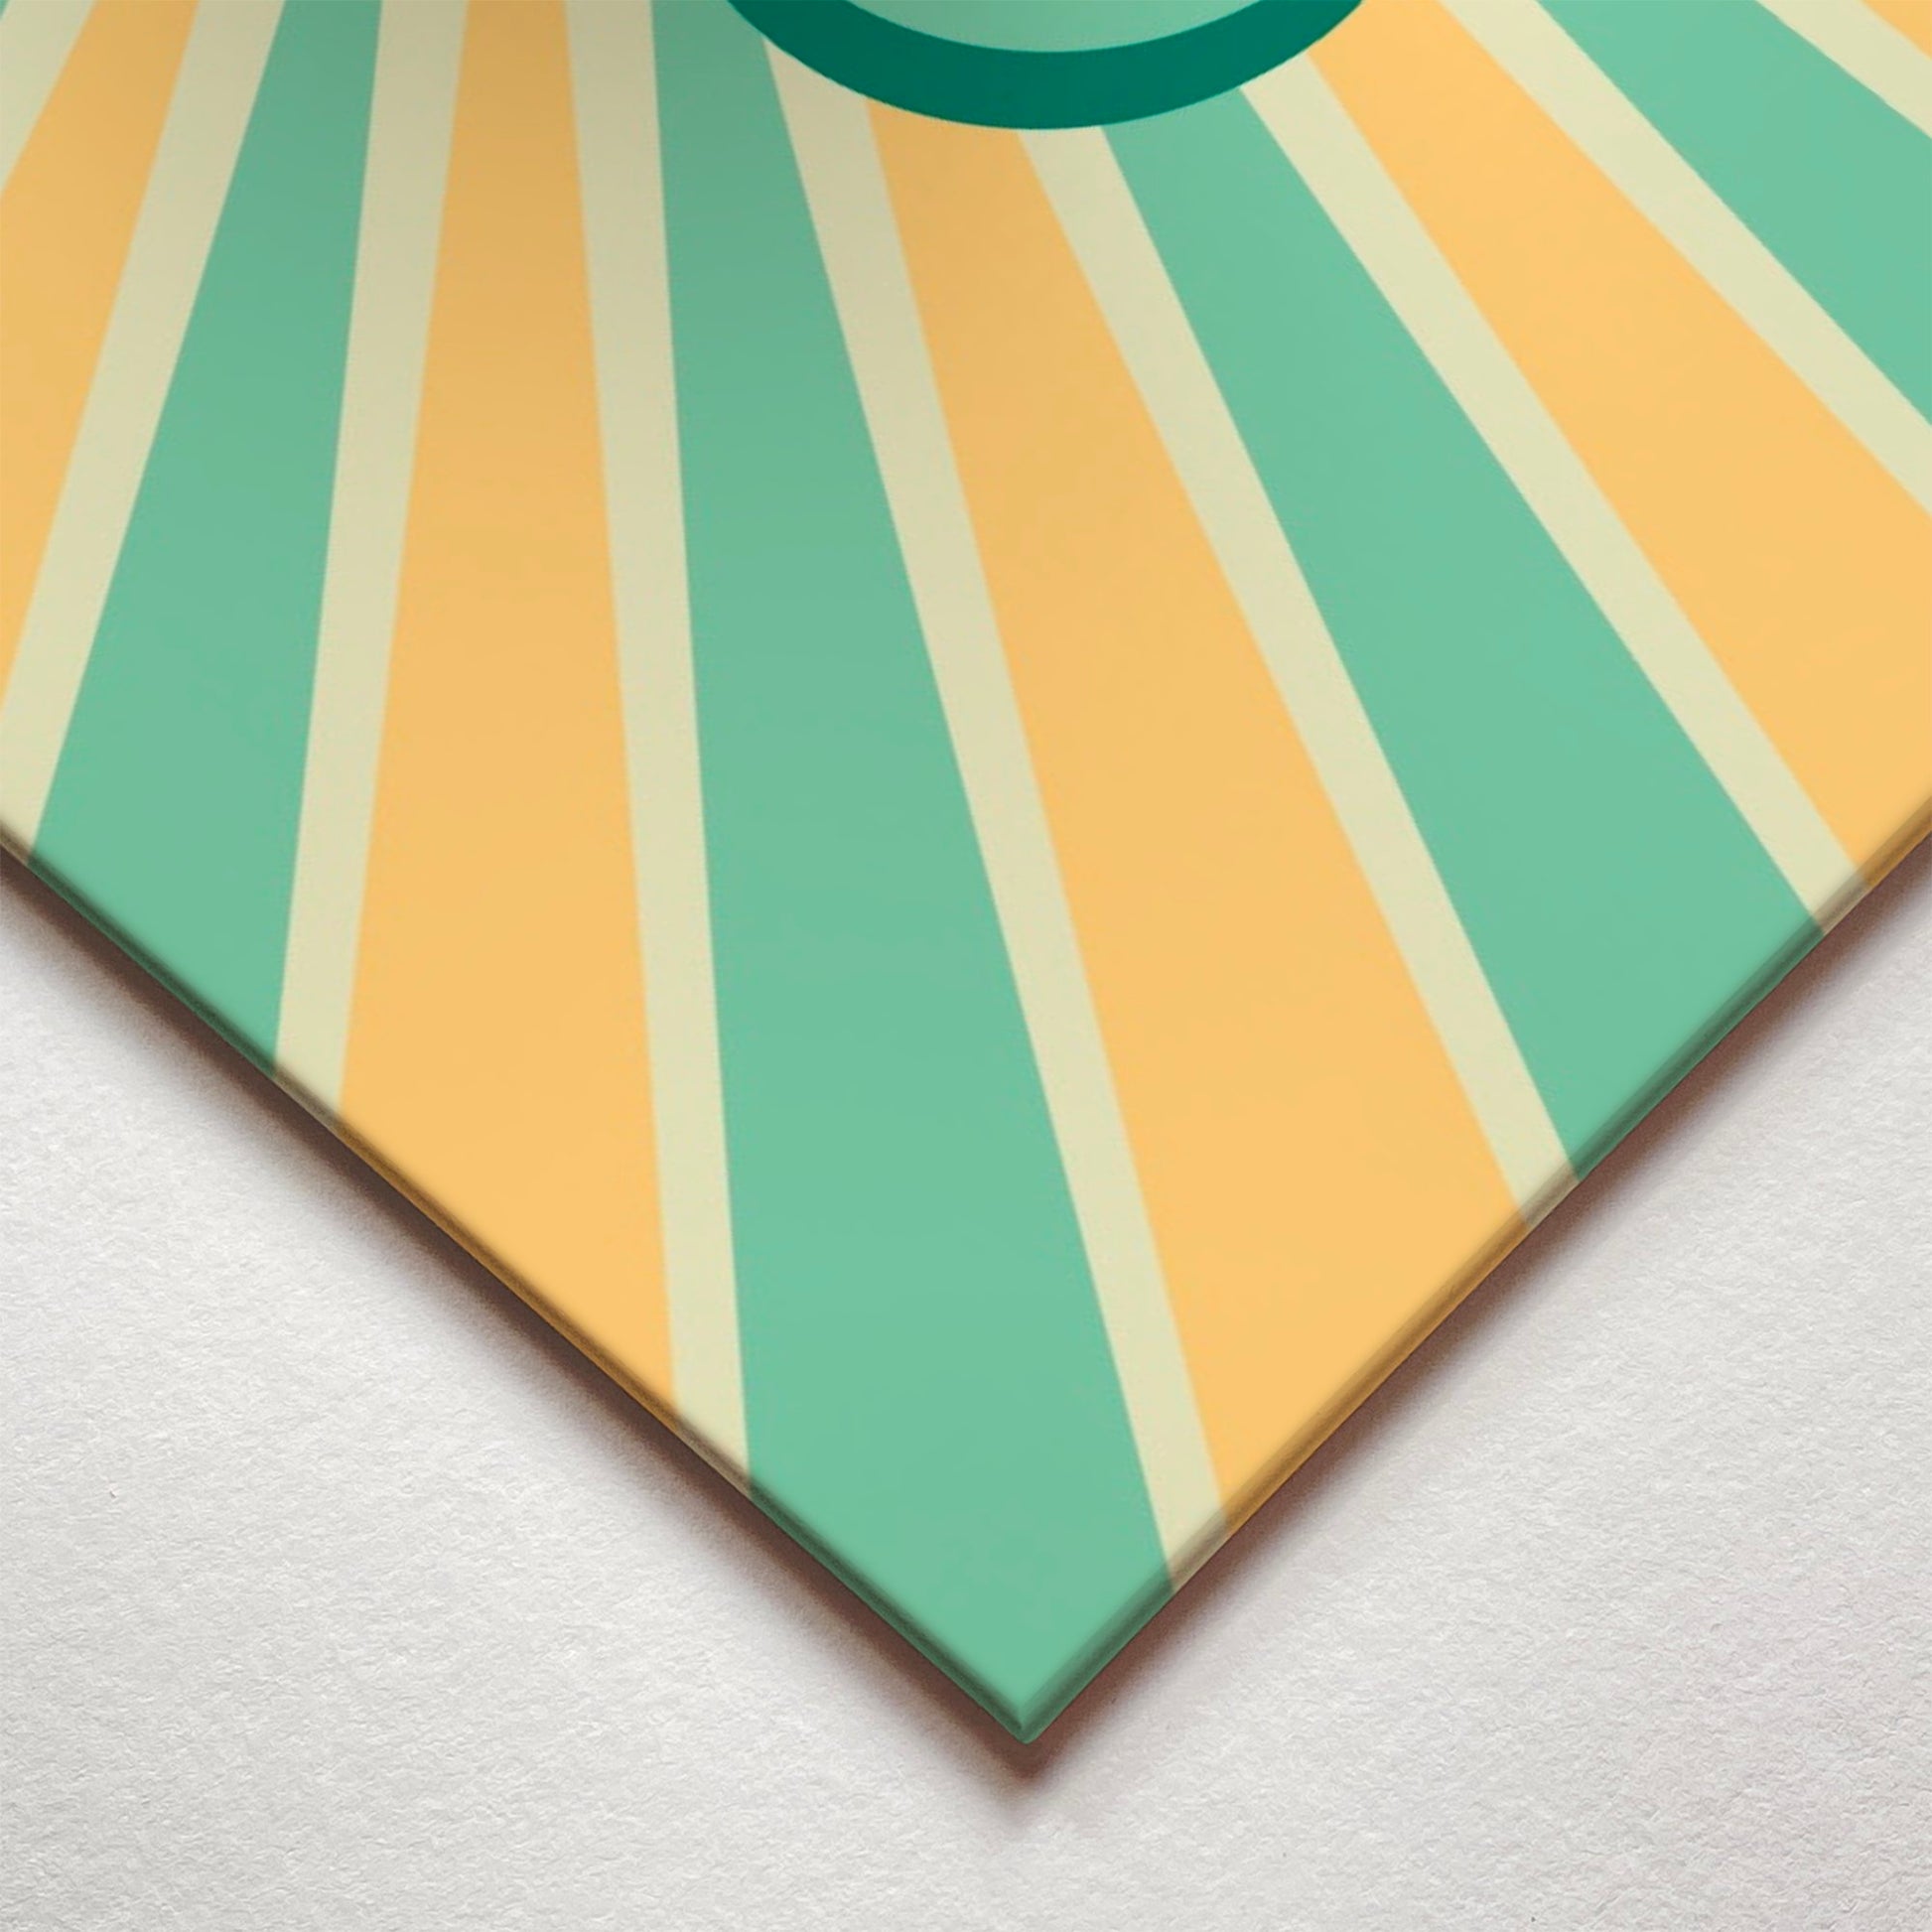 A closeup corner detail view of a metal art poster display plate with printed design of a Hello Sunshine Quote